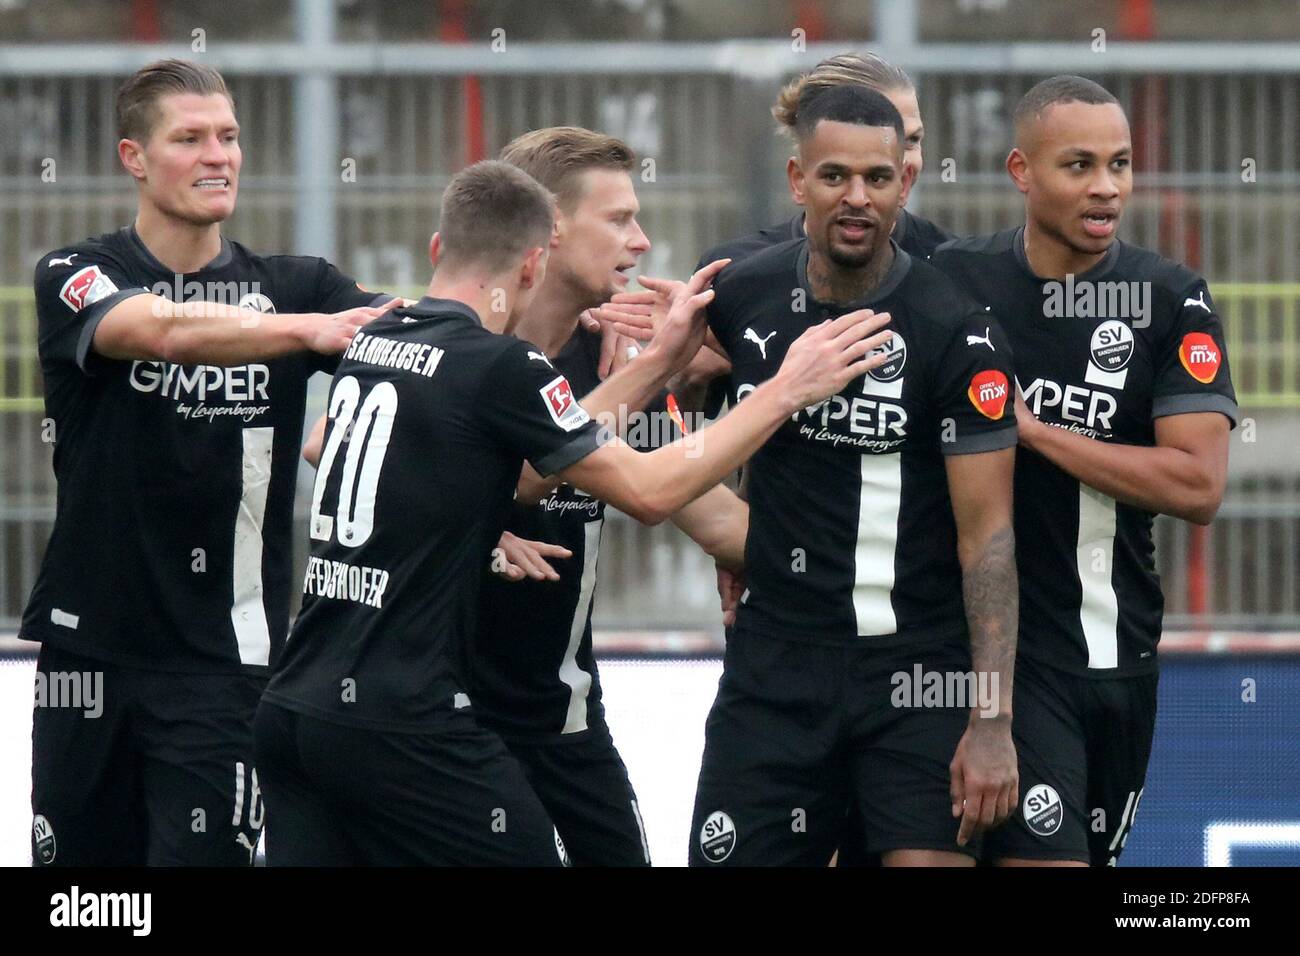 06 December 2020, Bavaria, Würzburg: Football: 2nd Bundesliga, Würzburger Kickers - SV Sandhausen, 10th matchday, in the Flyeralarm Arena. Daniel Keita Ruel (2nd from right) from Sandhausen cheers with his teammates about his goal for the 0:1. Photo: Daniel Karmann/dpa - IMPORTANT NOTE: In accordance with the regulations of the DFL Deutsche Fußball Liga and the DFB Deutscher Fußball-Bund, it is prohibited to exploit or have exploited in the stadium and/or from the game taken photographs in the form of sequence images and/or video-like photo series. Stock Photo